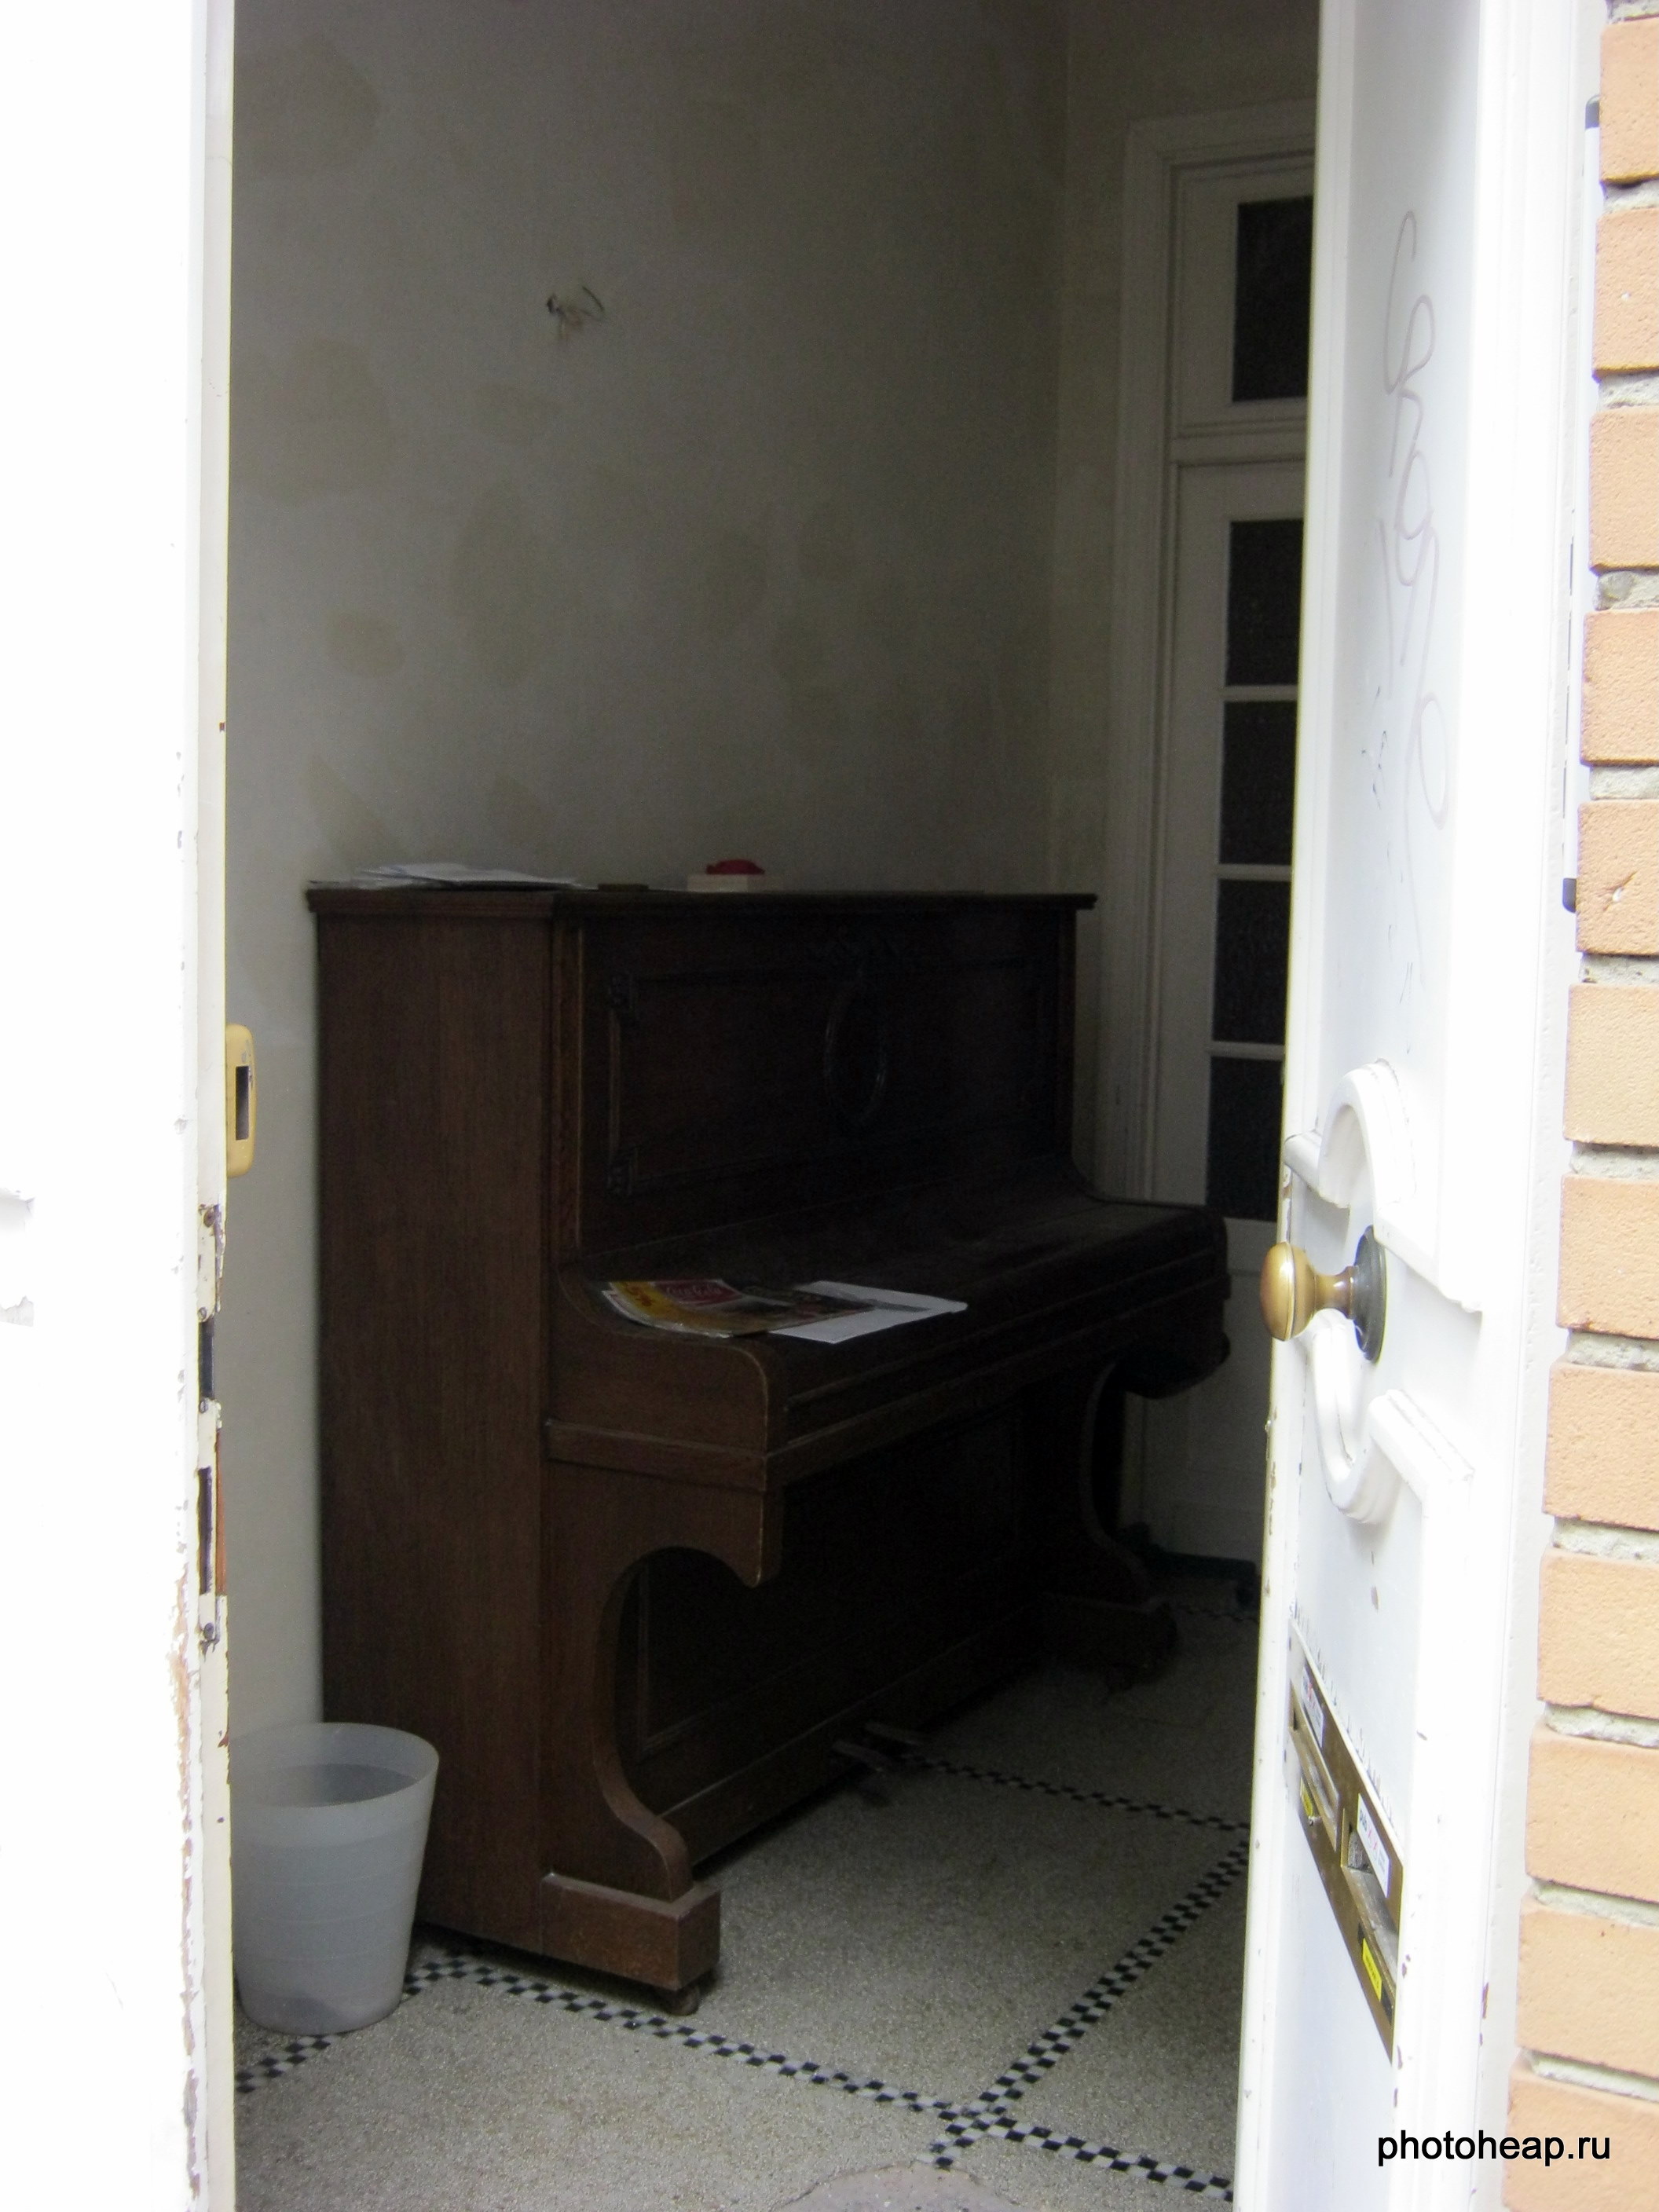 Brussels - Porch piano